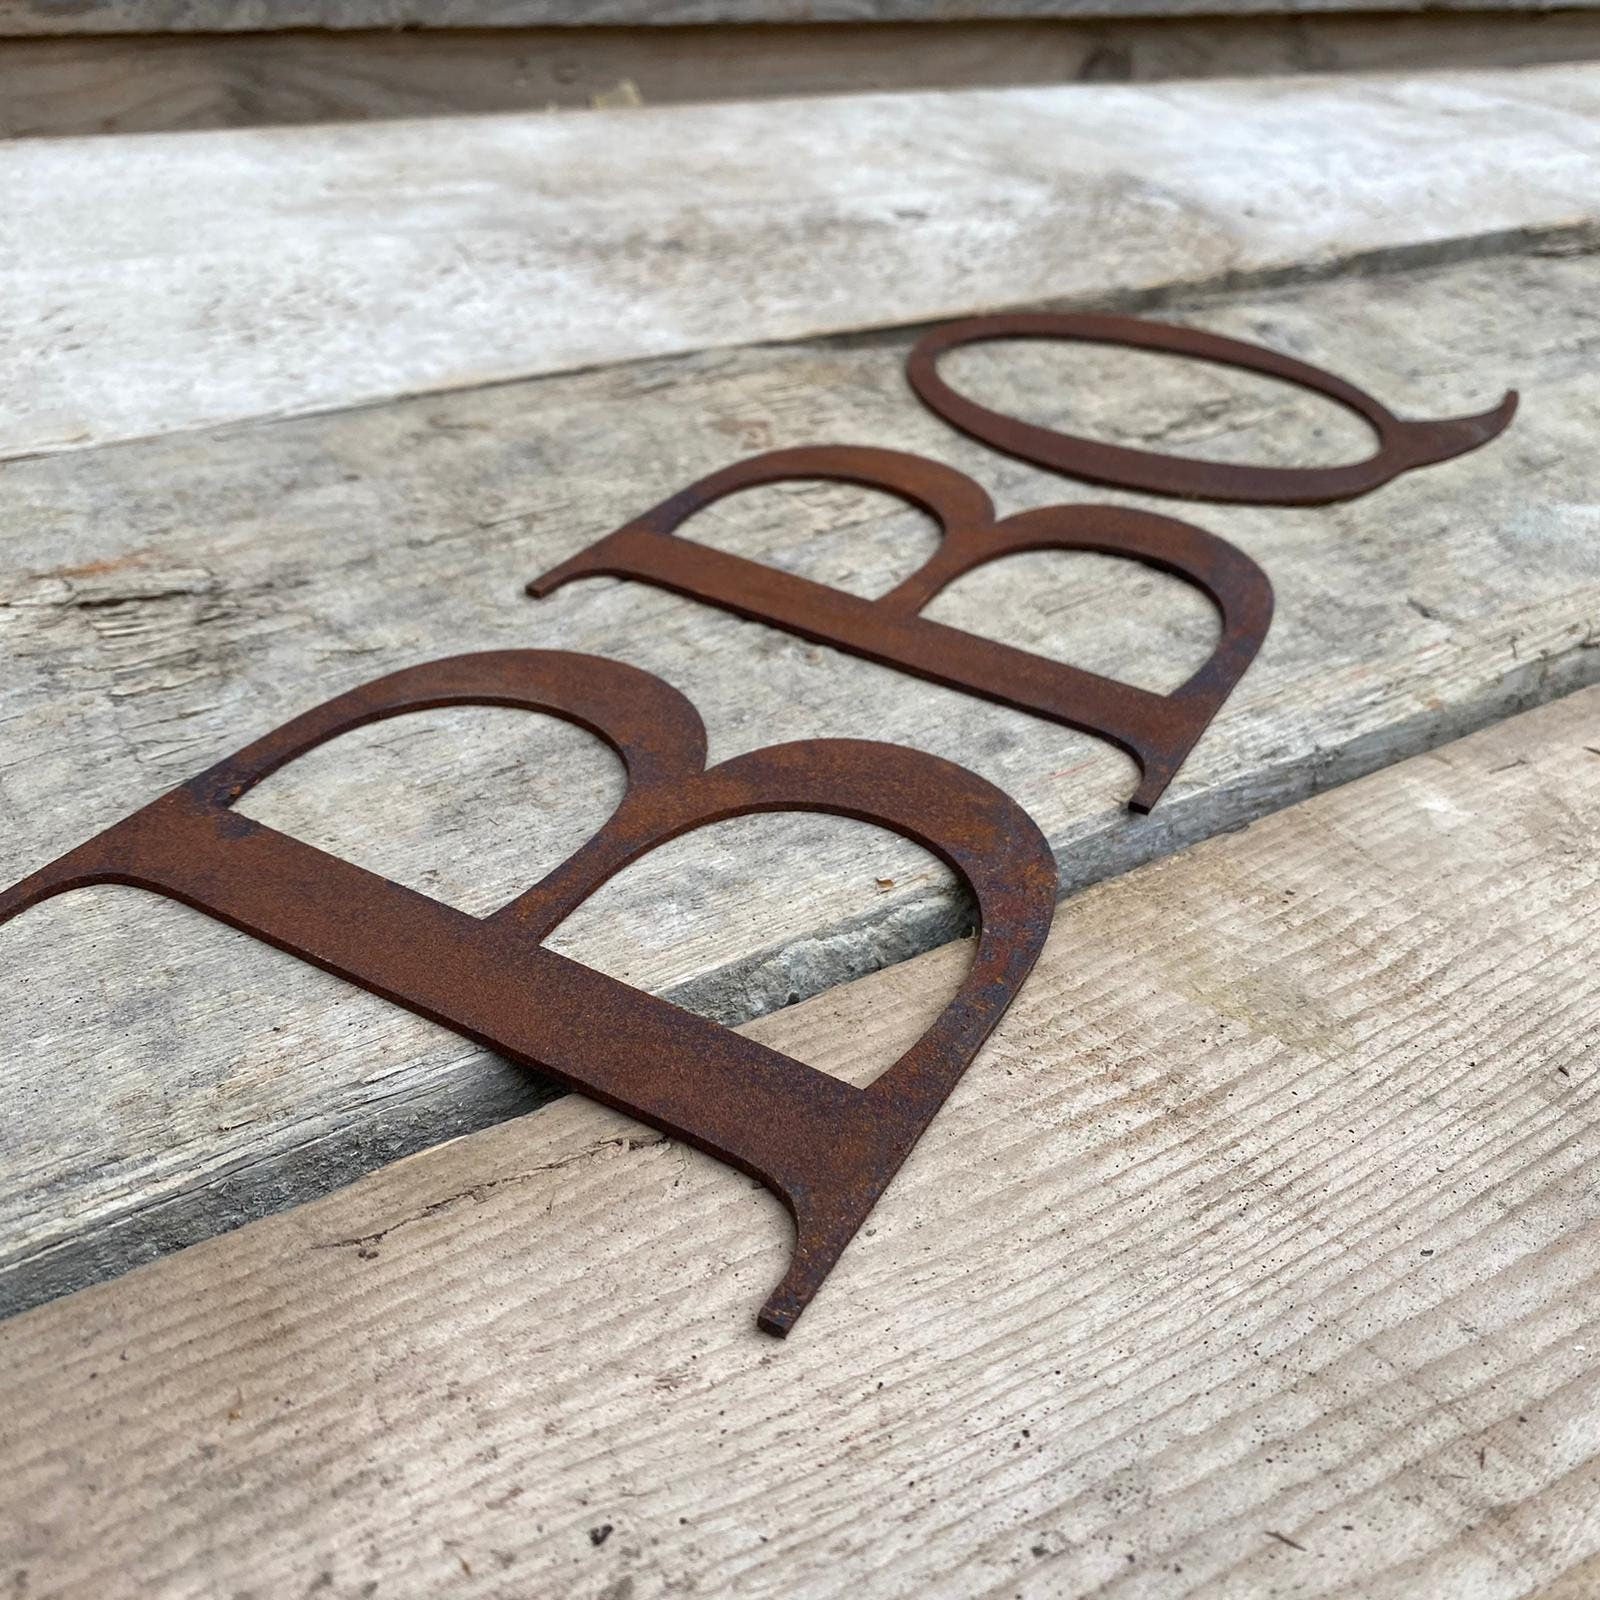 Rusty metal classic style metal lettering spelling out BBQ